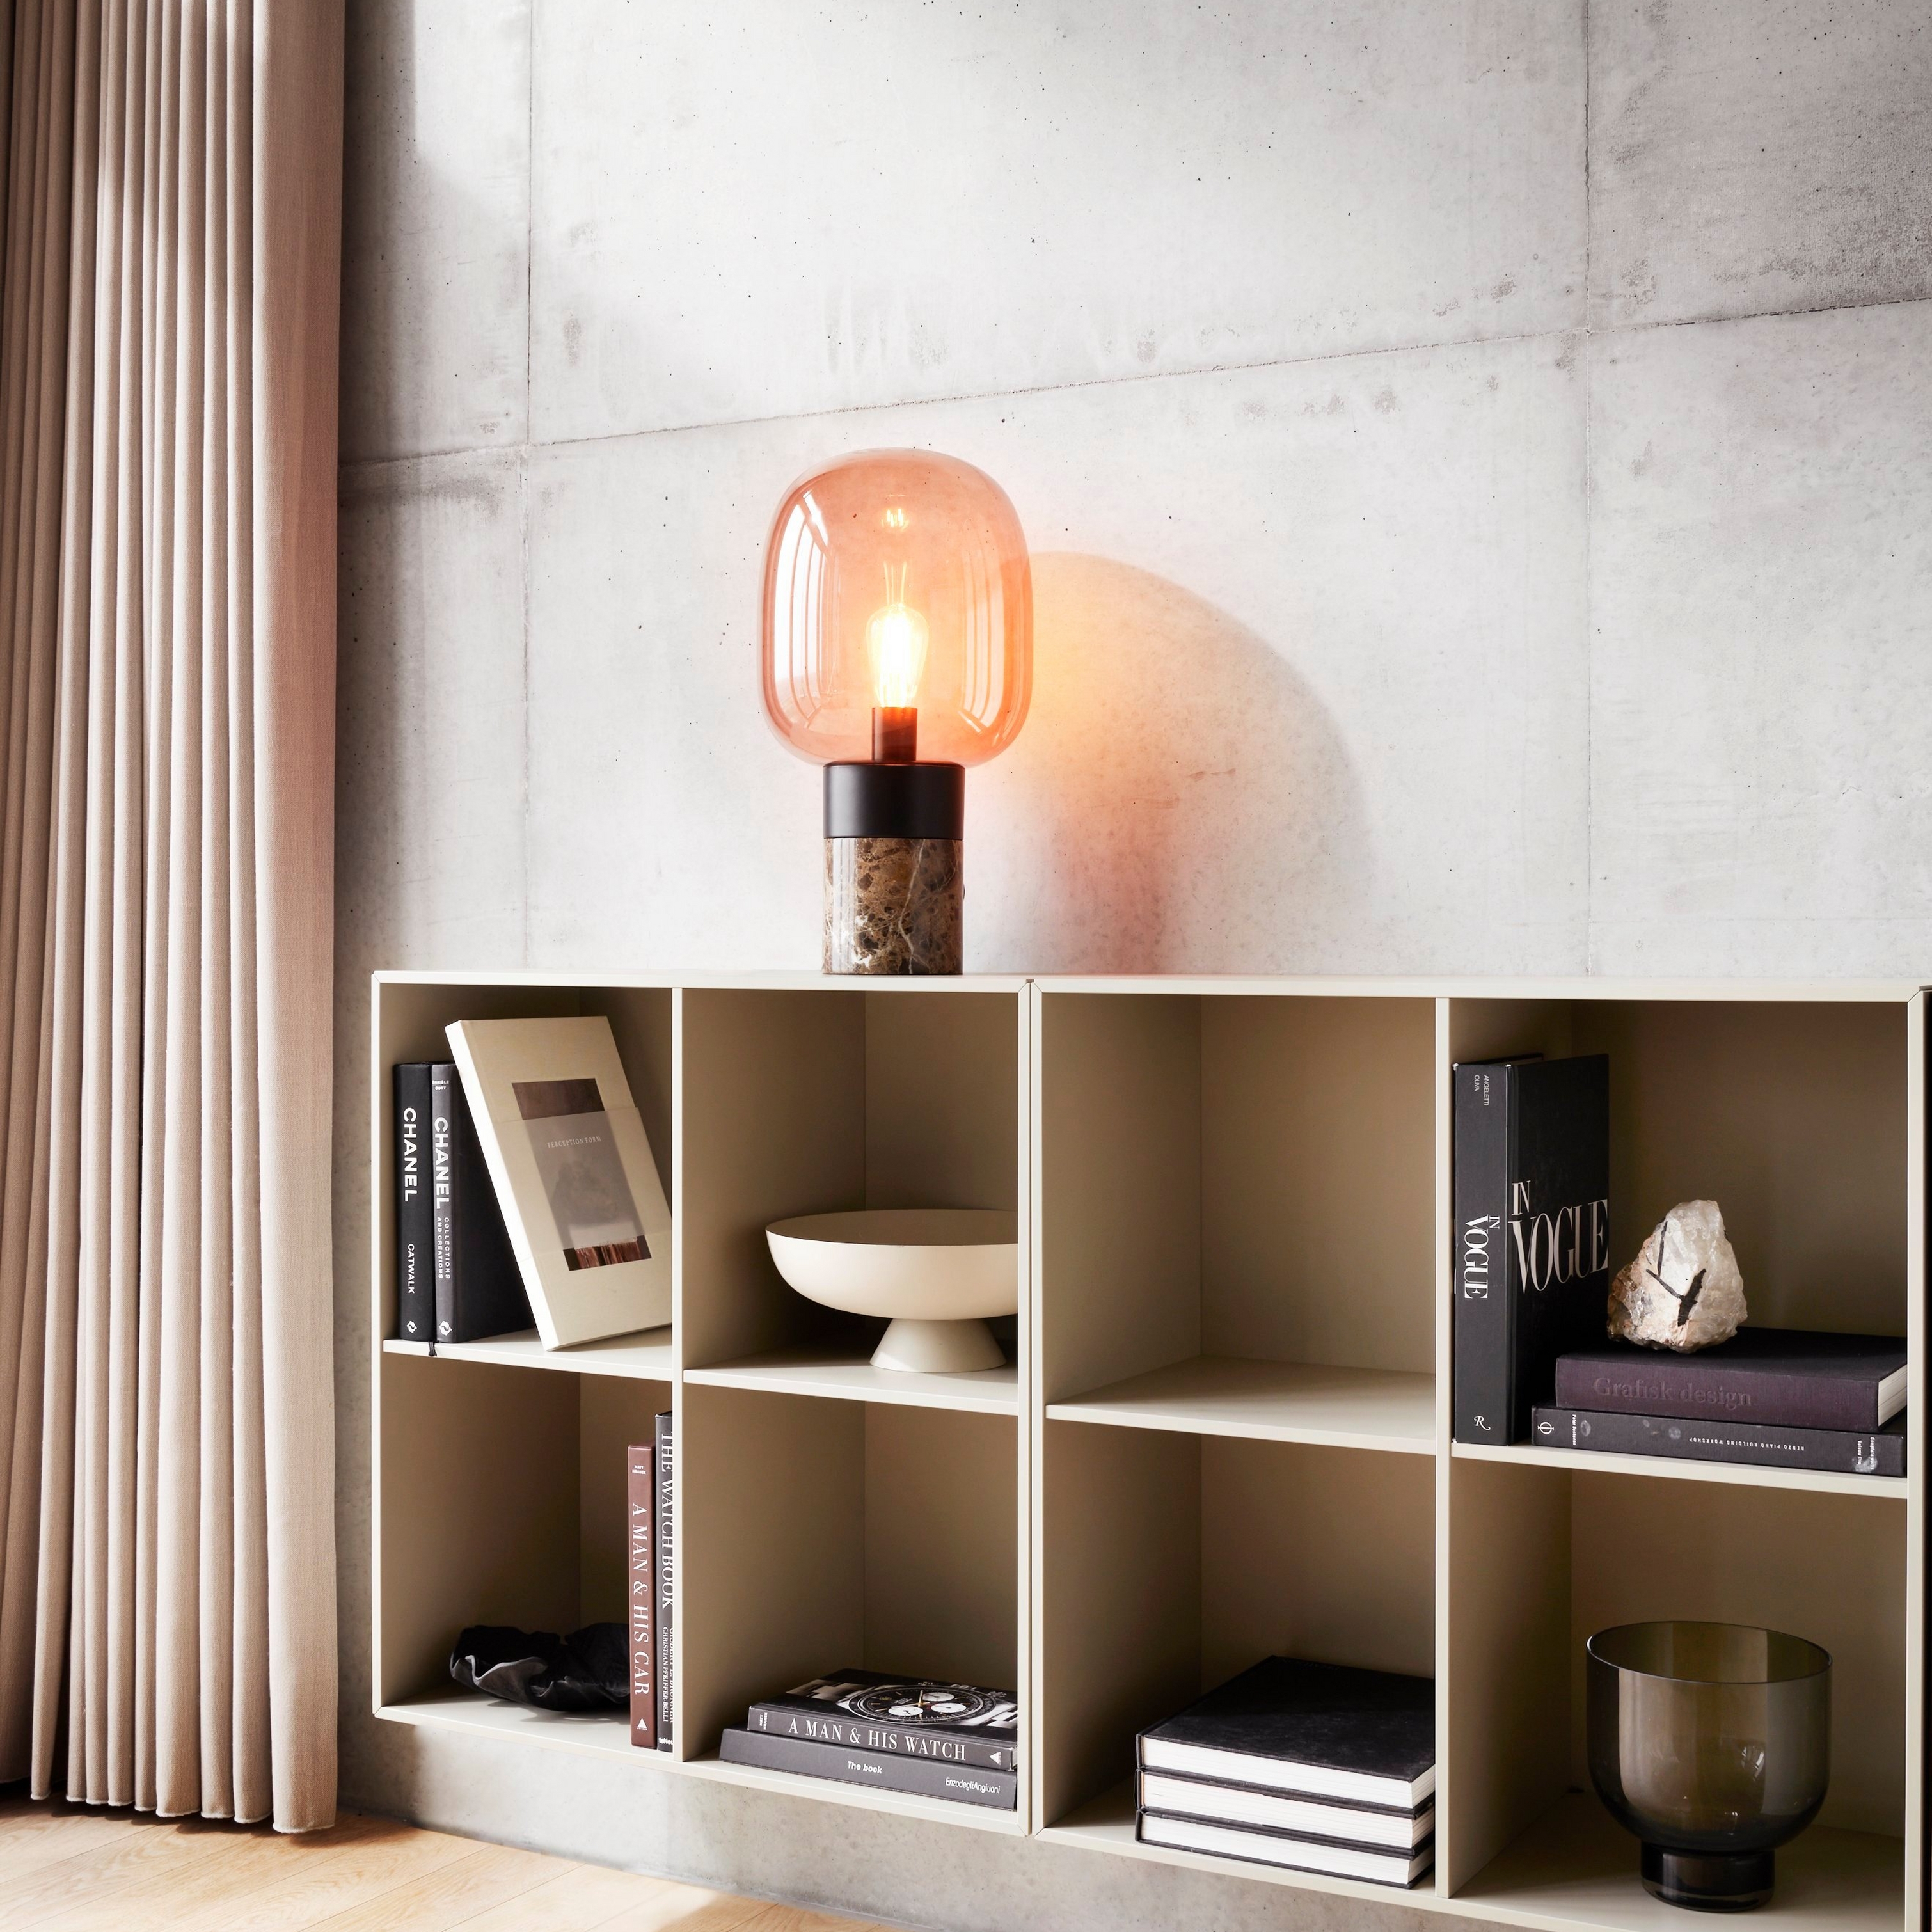 Modern shelf with books, bowl, and lamp against a concrete wall, with curtains to the side.